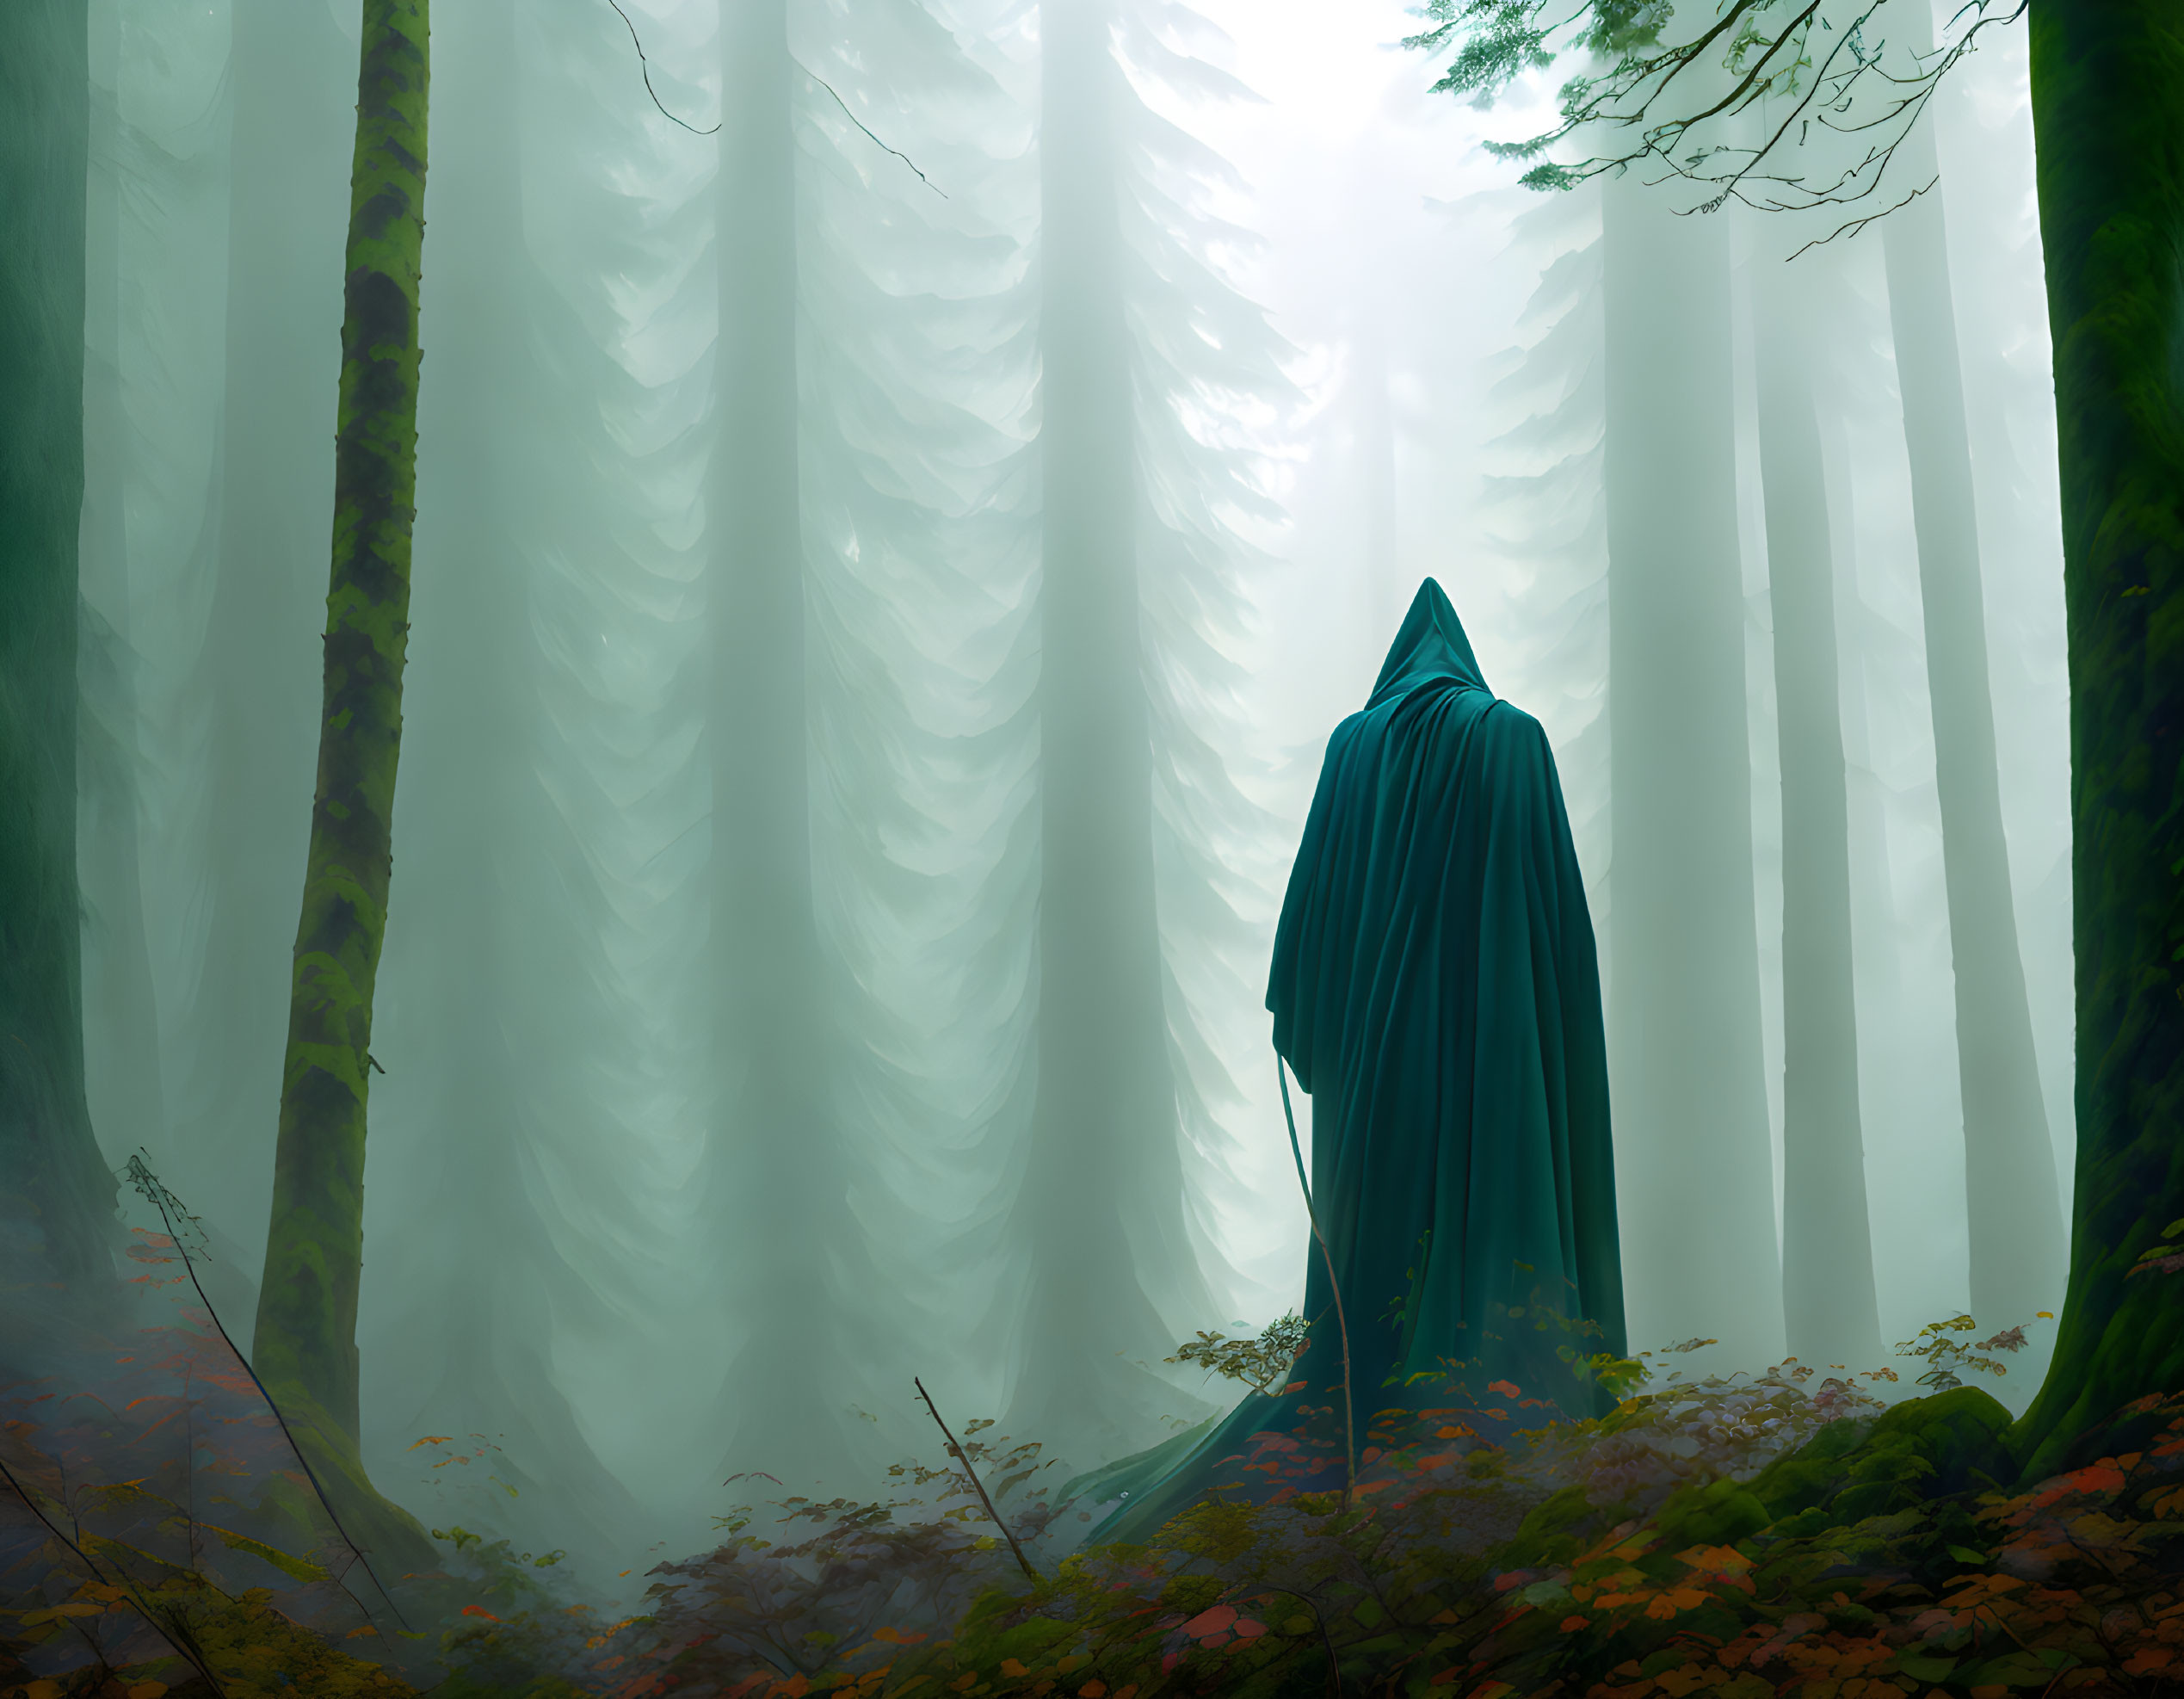 Cloaked figure in misty forest with tall trees and autumn leaves